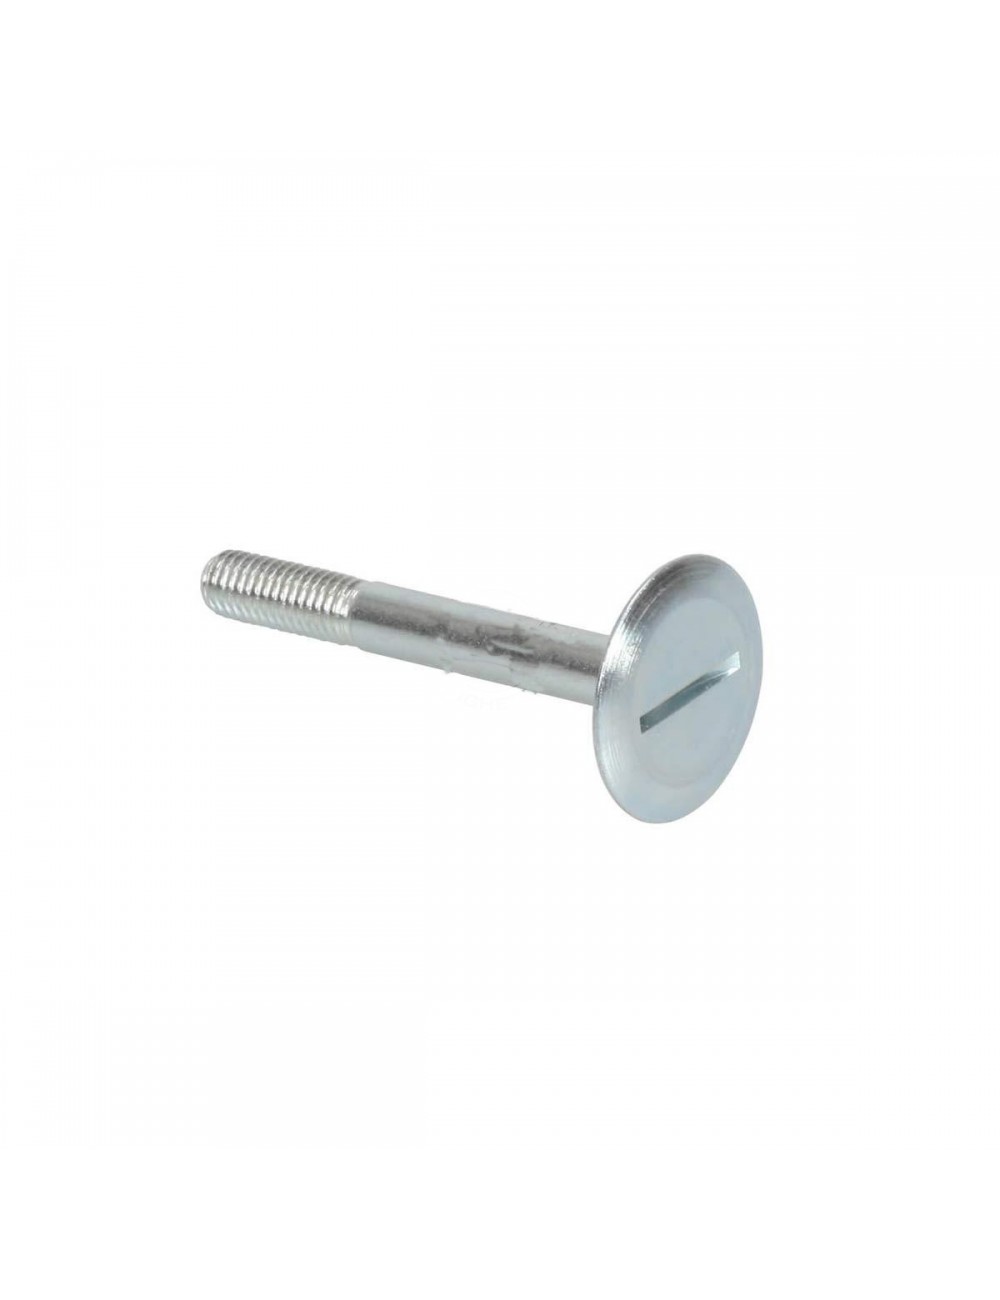 Screw for Seat M8x65mm. Head D.30mm H.2mm, machine product with rolling threat